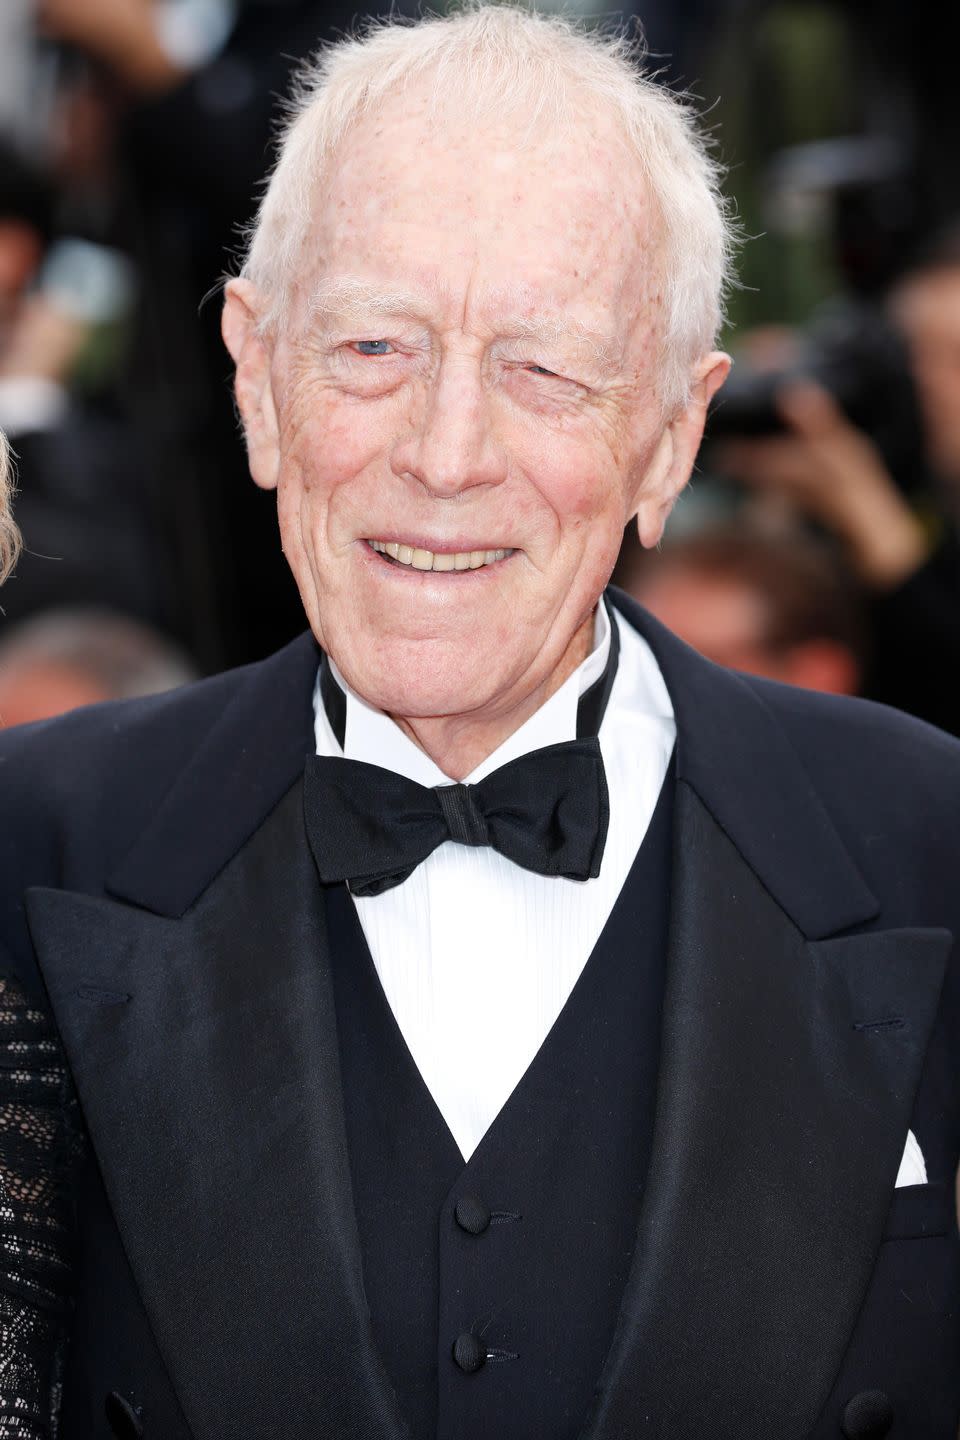 Max von Sydow – actor known for Star Wars, Game of Thrones and The Exorcist – died March 8